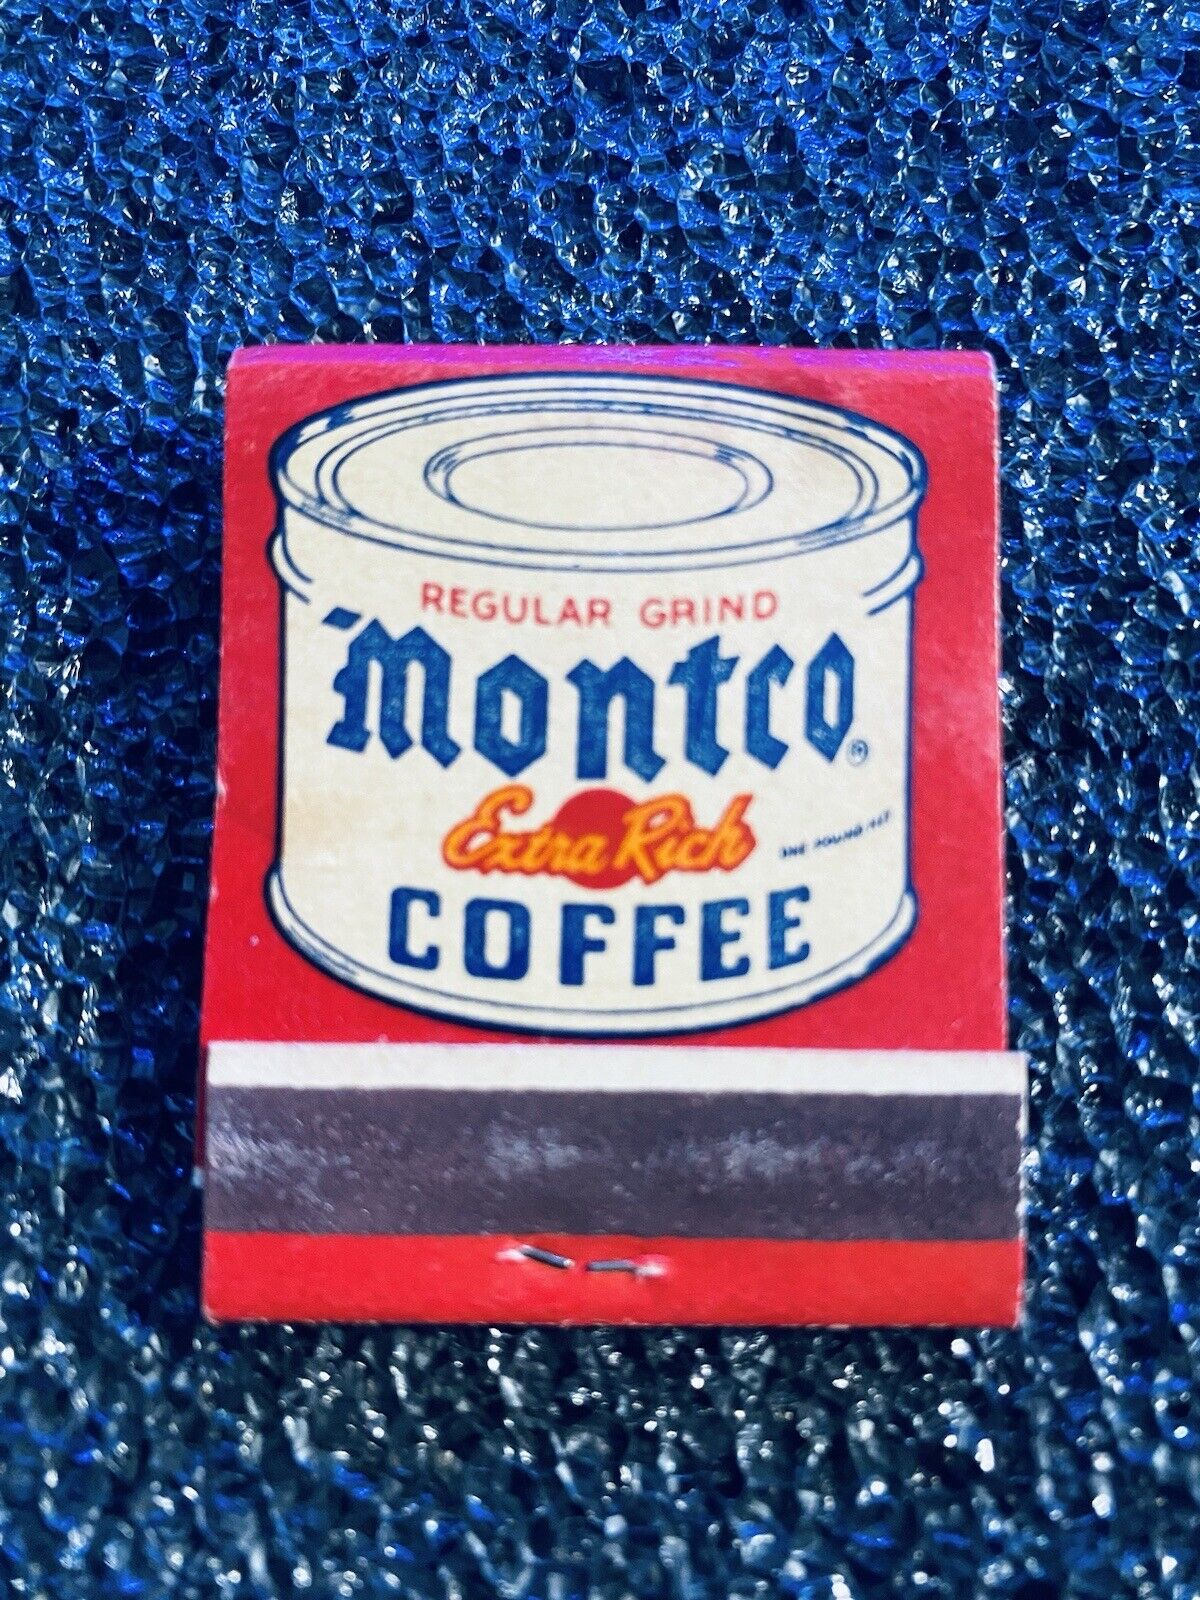 Vintage Matchbook MONTCO EXTRA RICH COFFEE Full Matchbook...